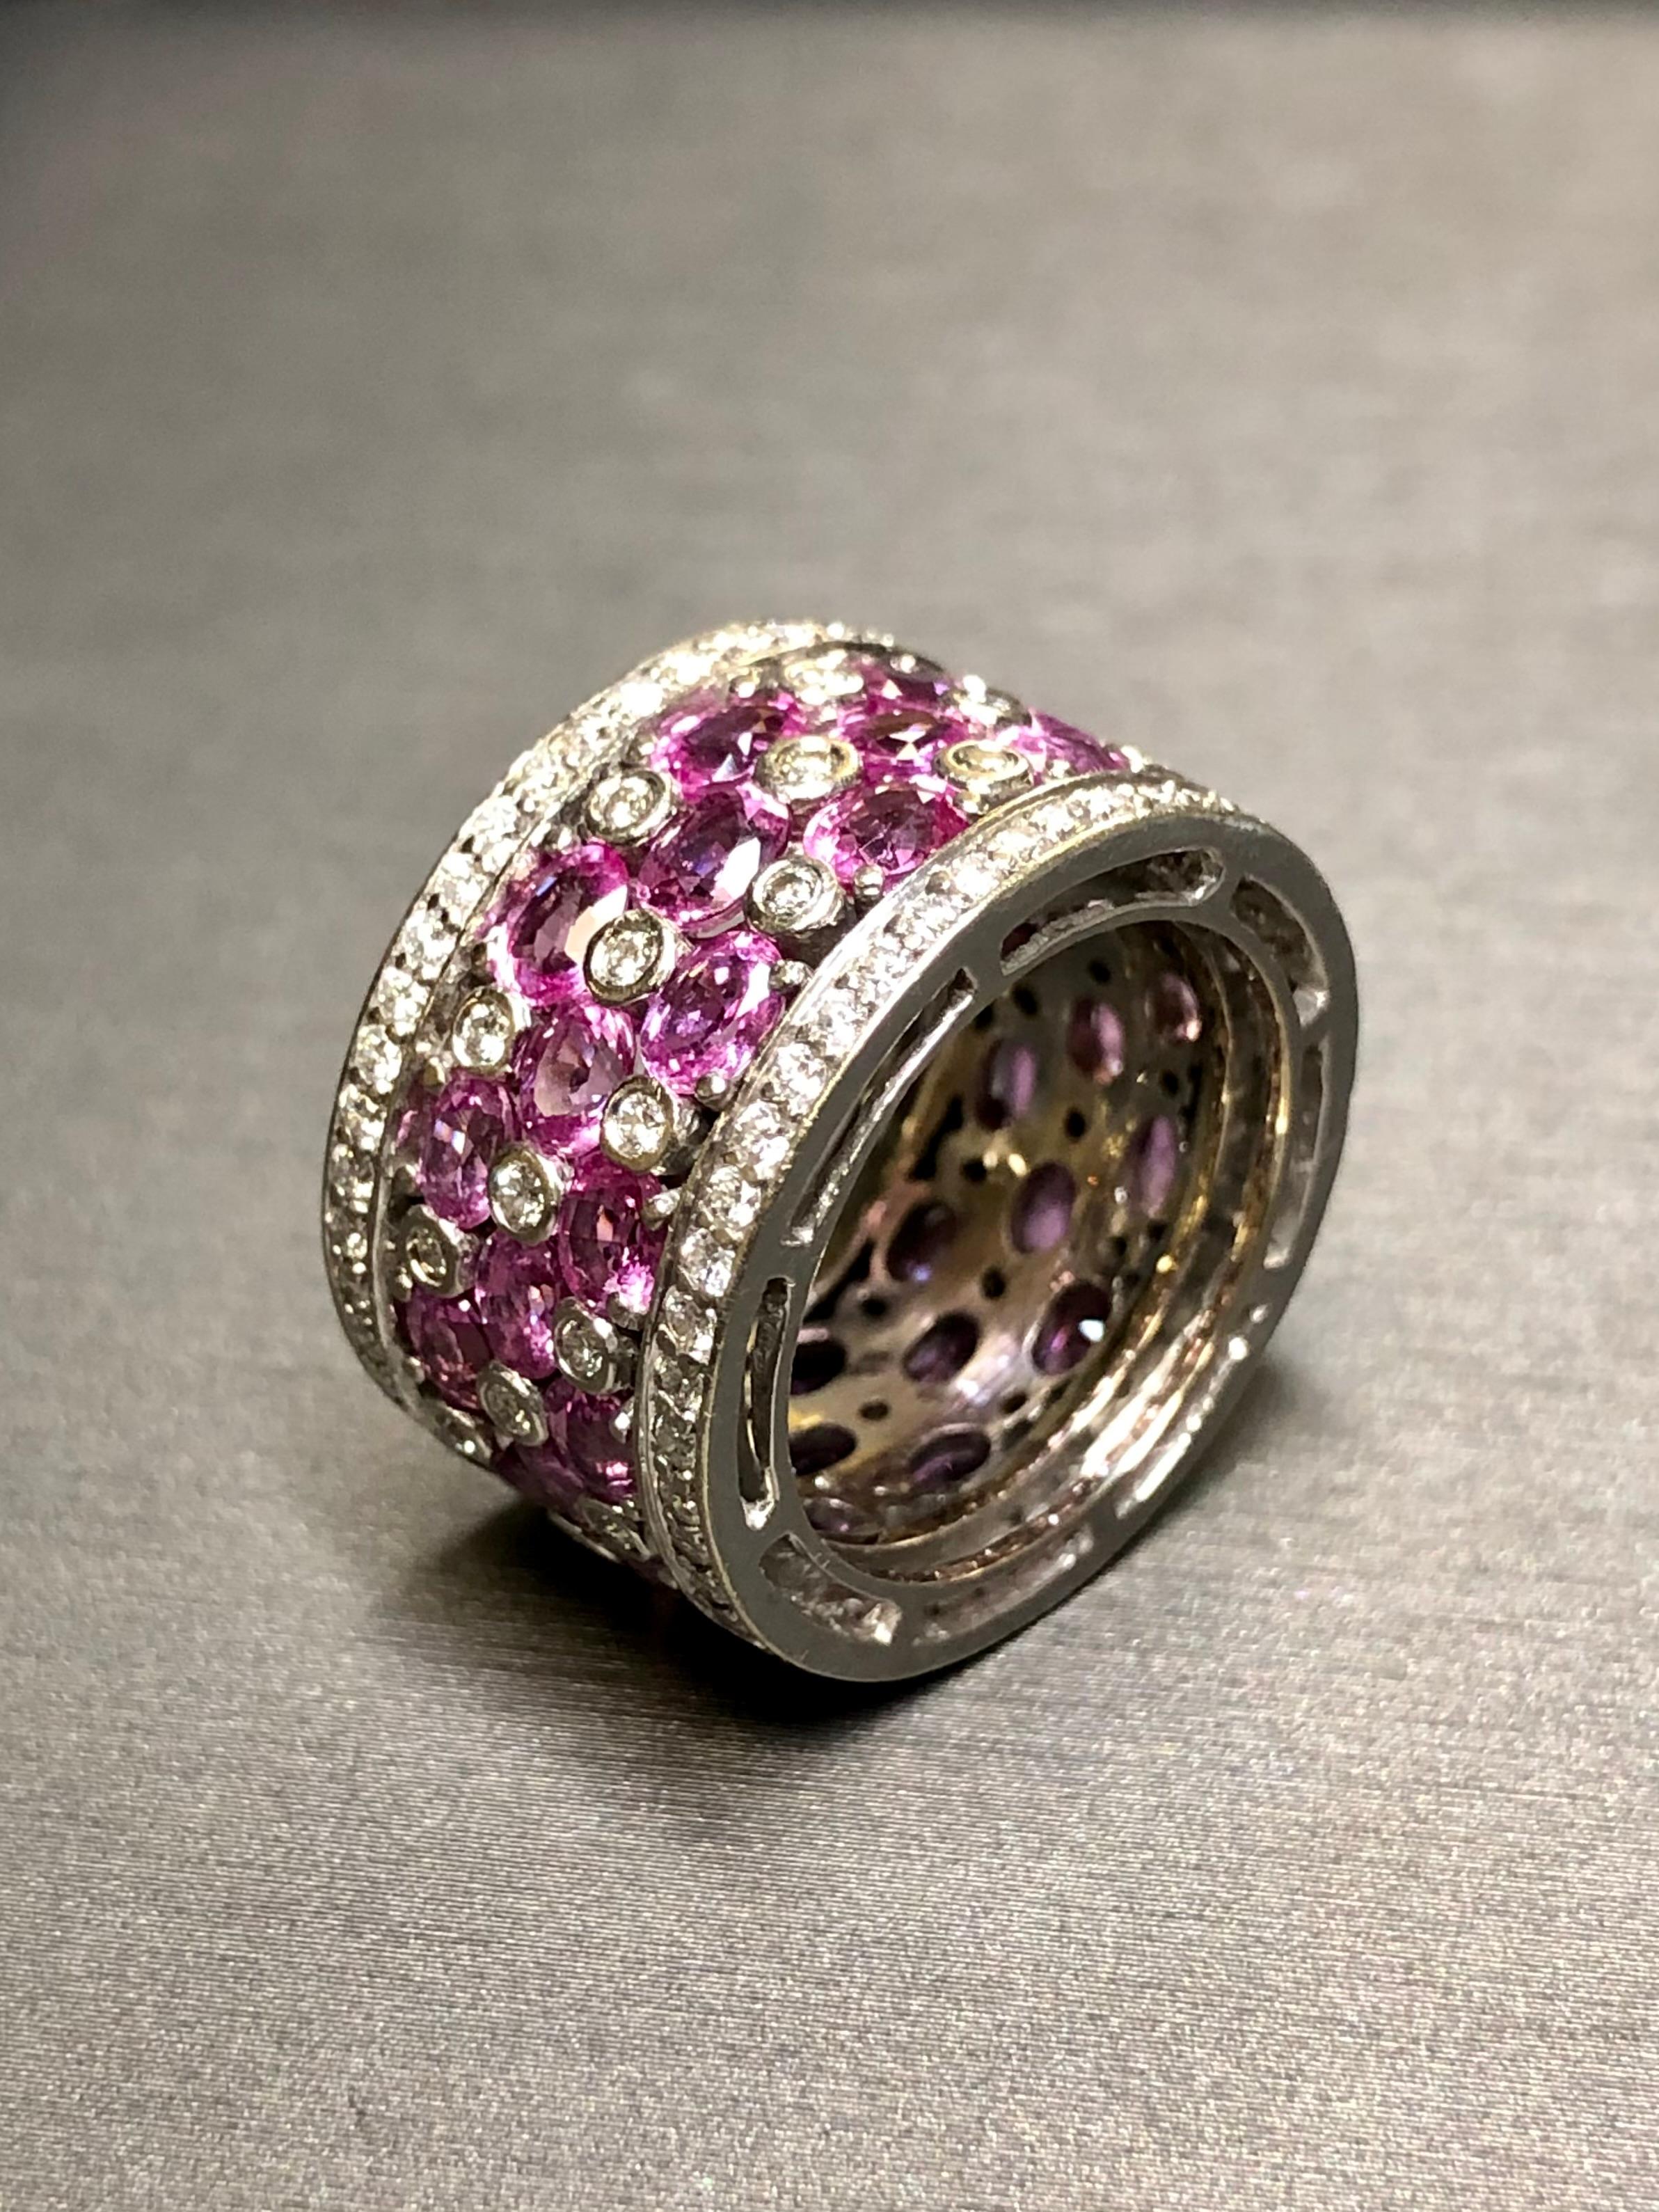 Estate 18K Pink Sapphire Diamond Wide Band Cocktail Ring 10.86cttw Sz 6.25 In Good Condition For Sale In Winter Springs, FL